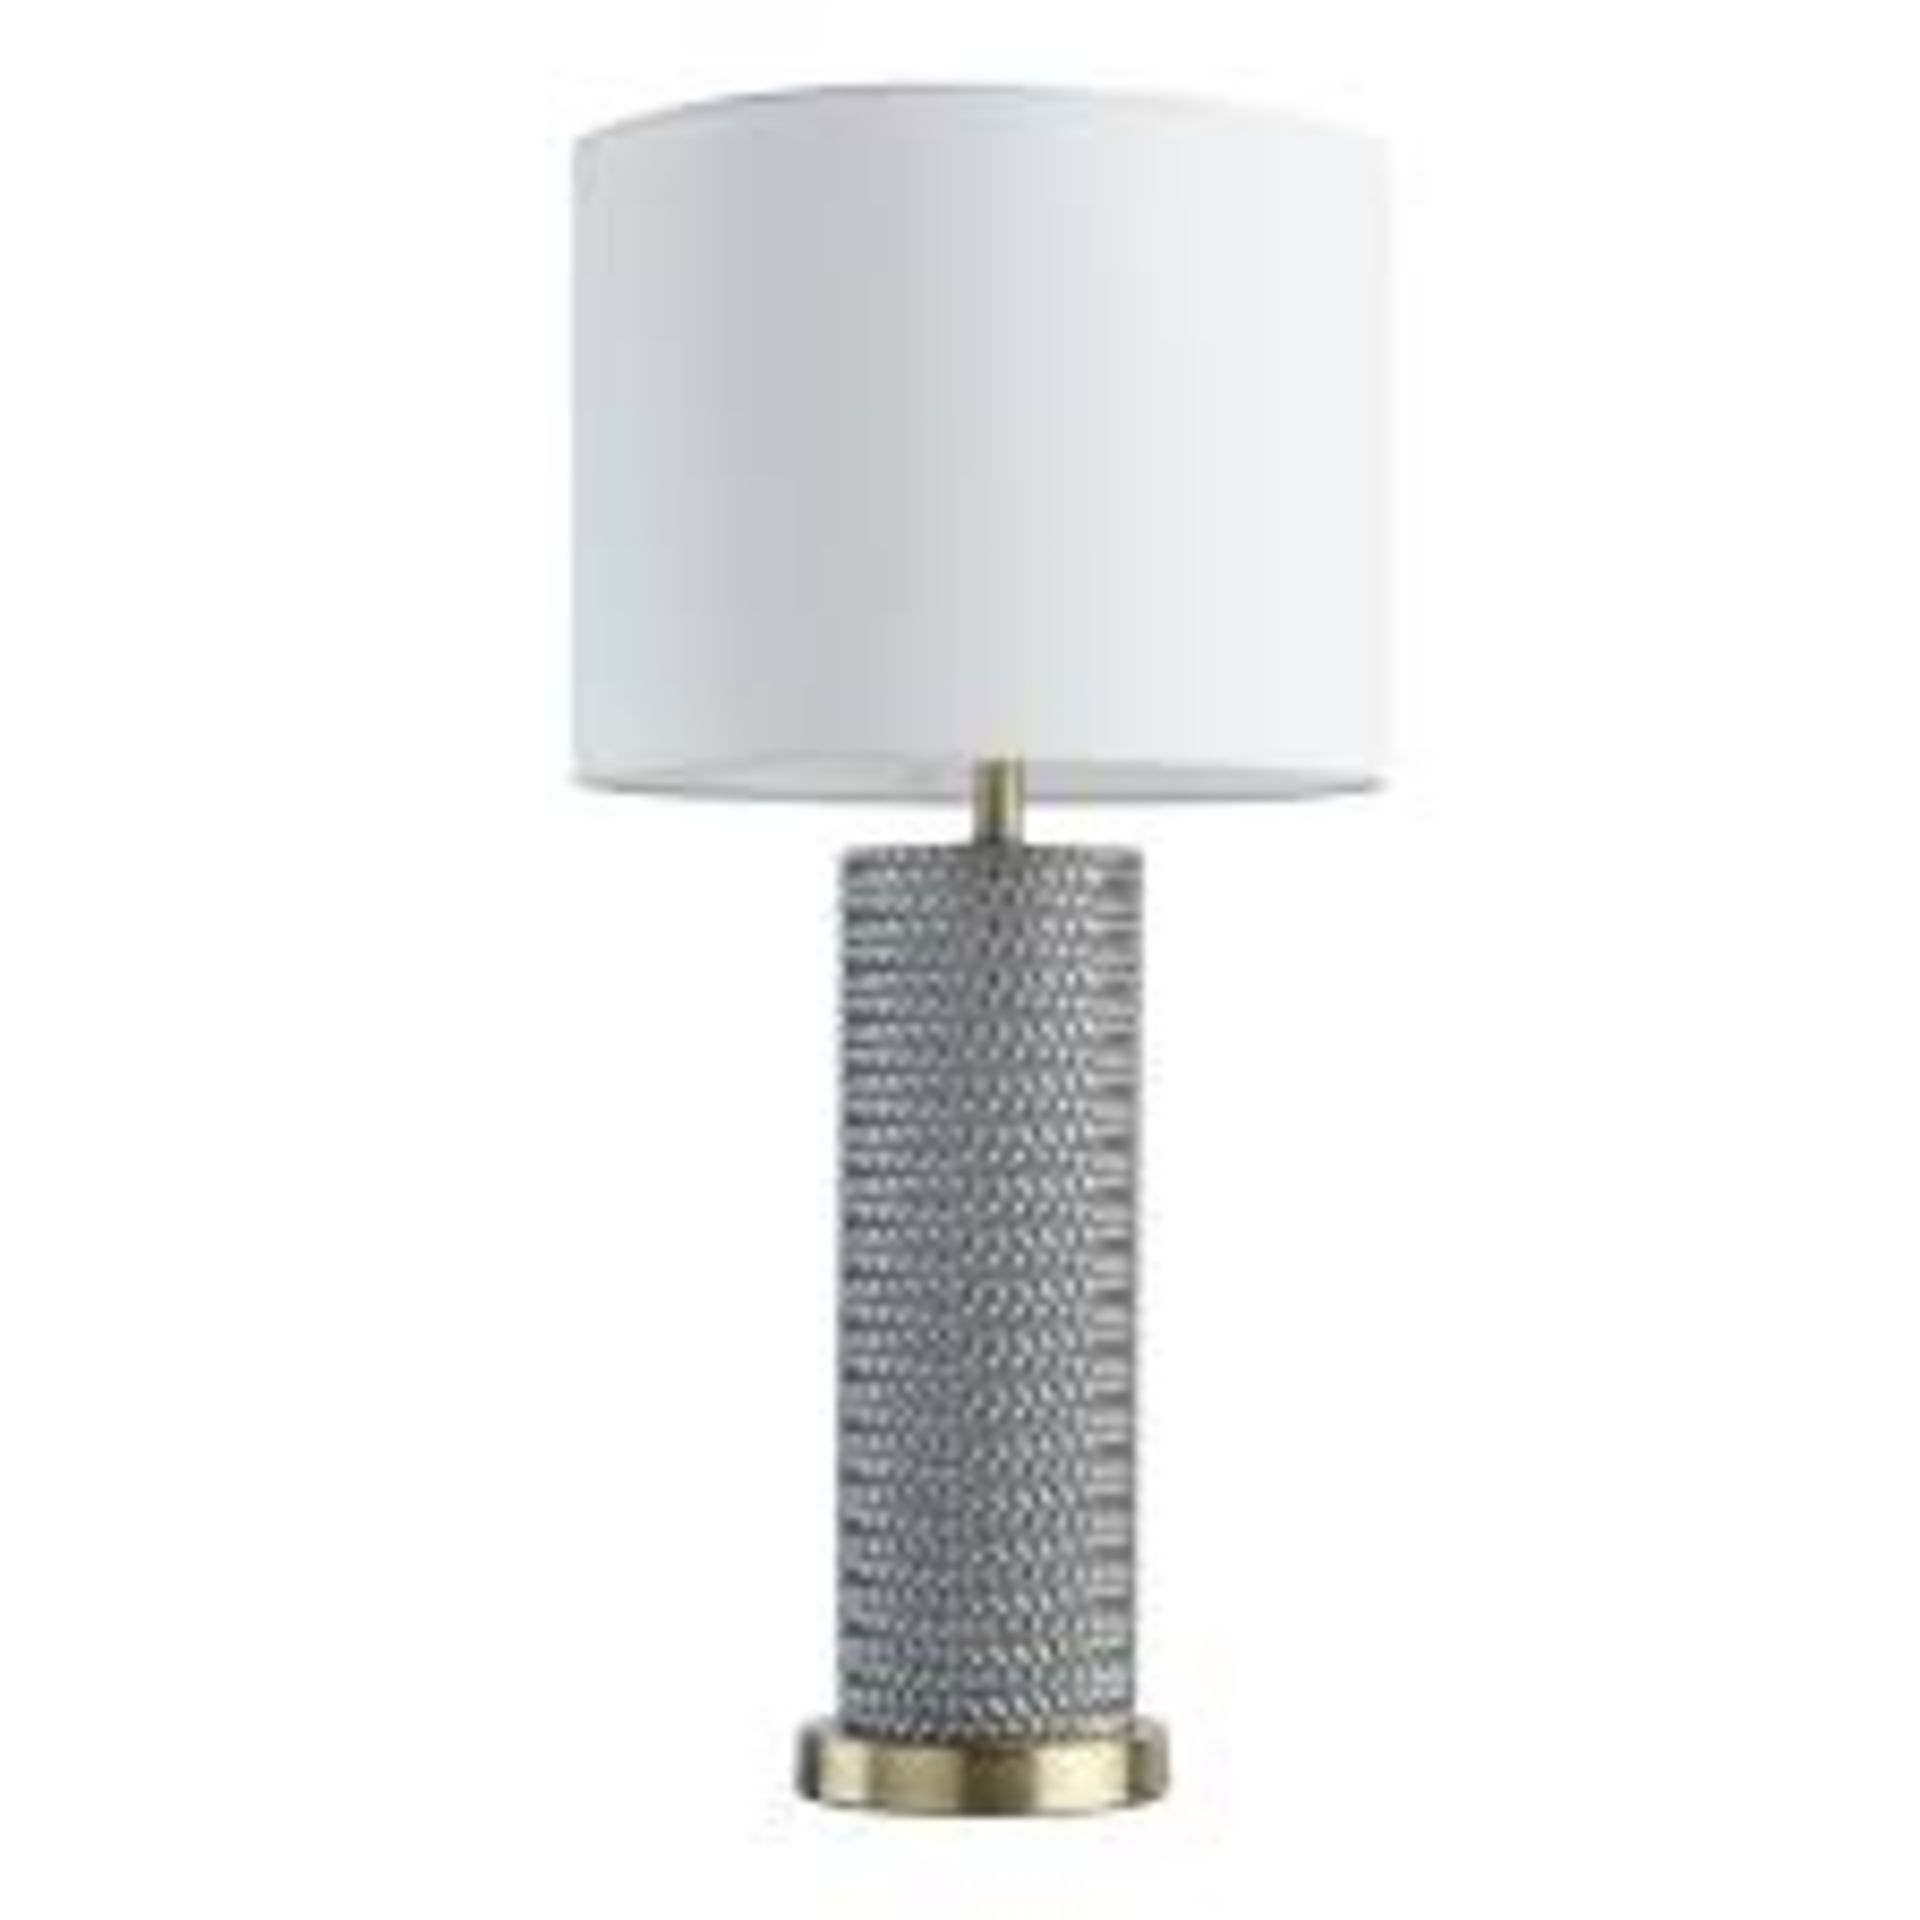 Boxed MW Lighting, Designer Table Lamp, RRP£95.00 17105 (Public Viewing and Appraisals Available)